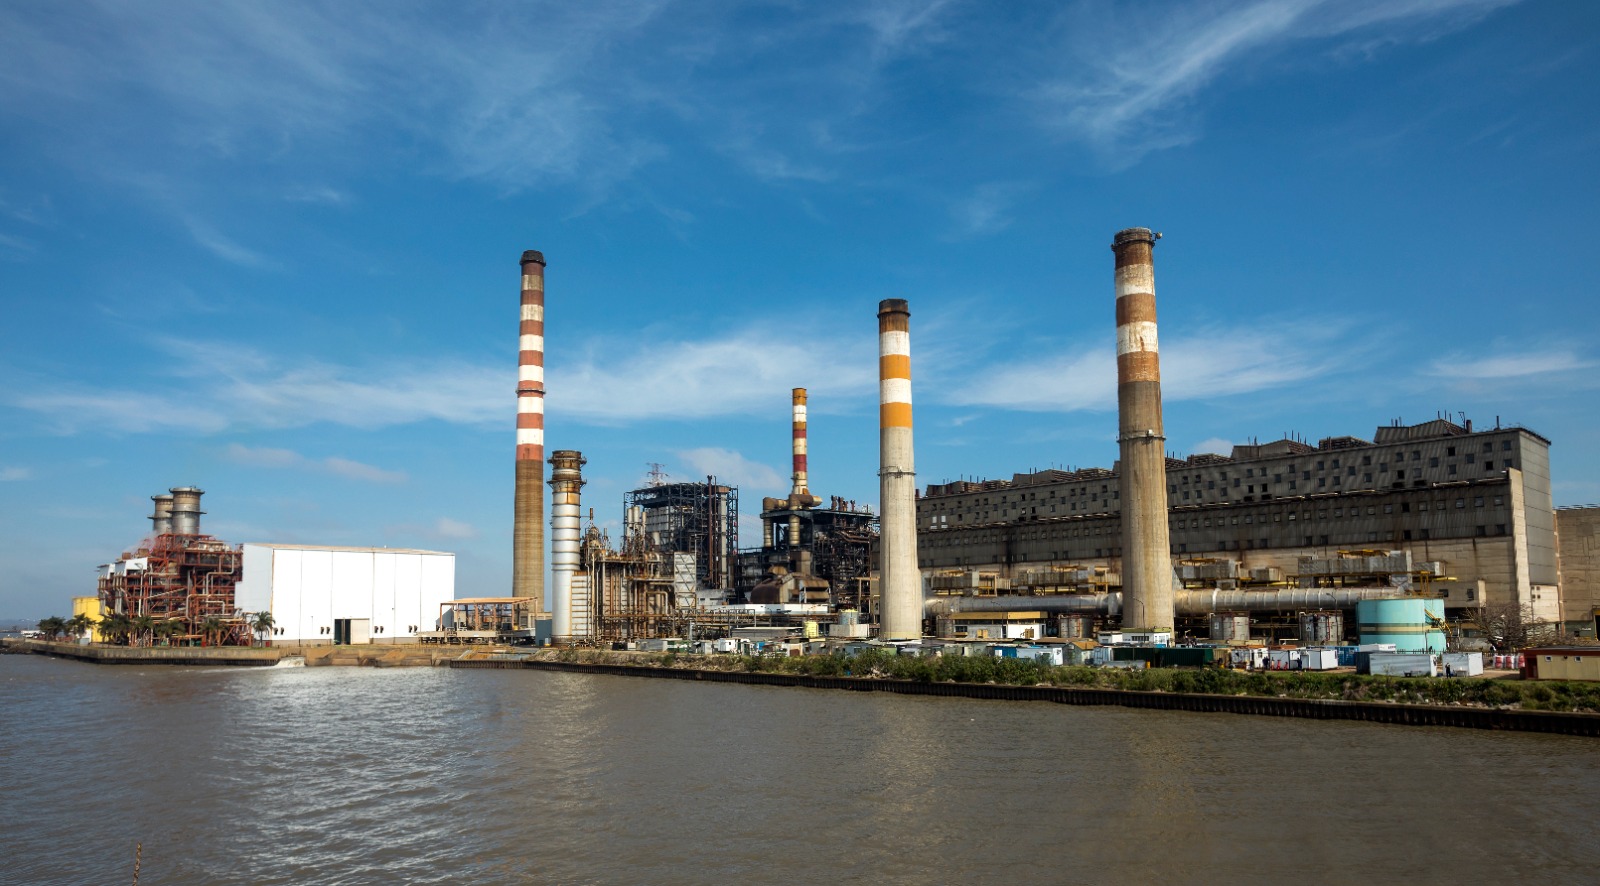 Another image of the Buenos Aires power station